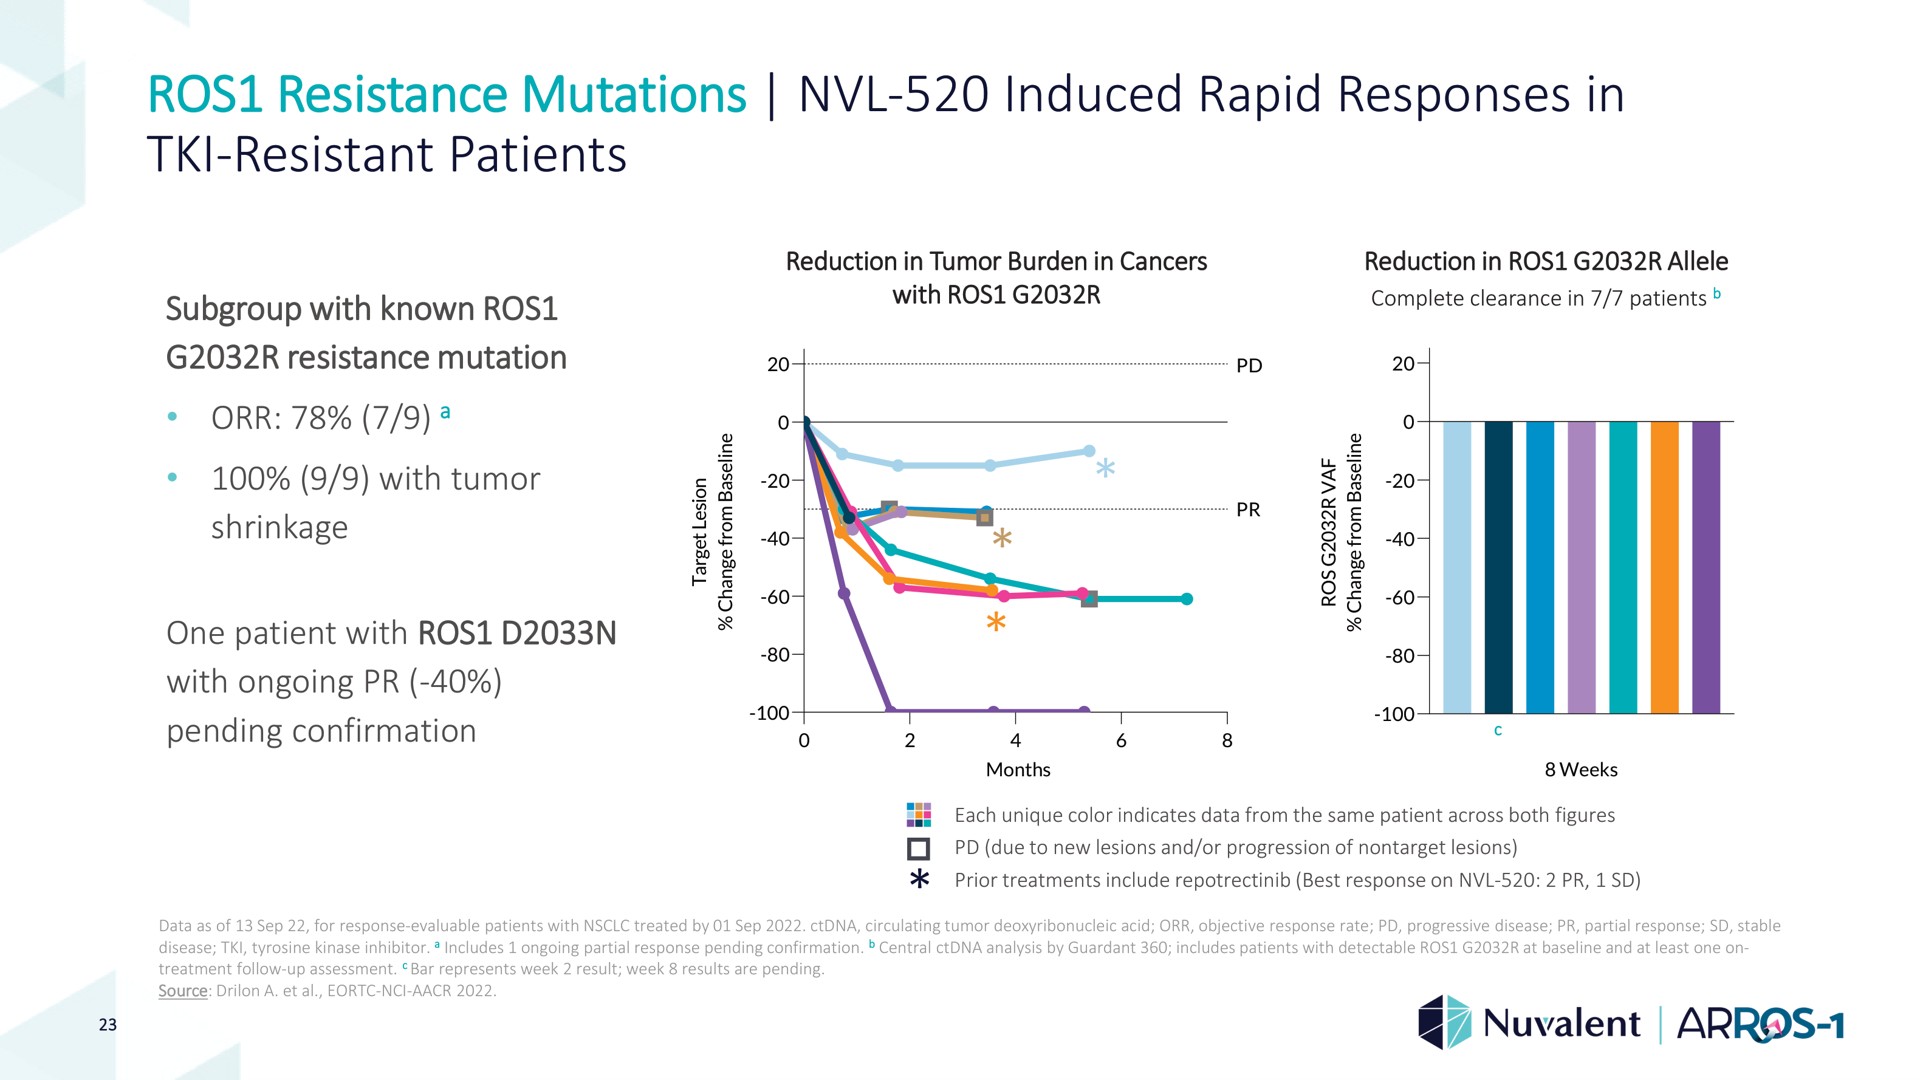 resistance mutations induced rapid responses in resistant patients resistant | Nuvalent